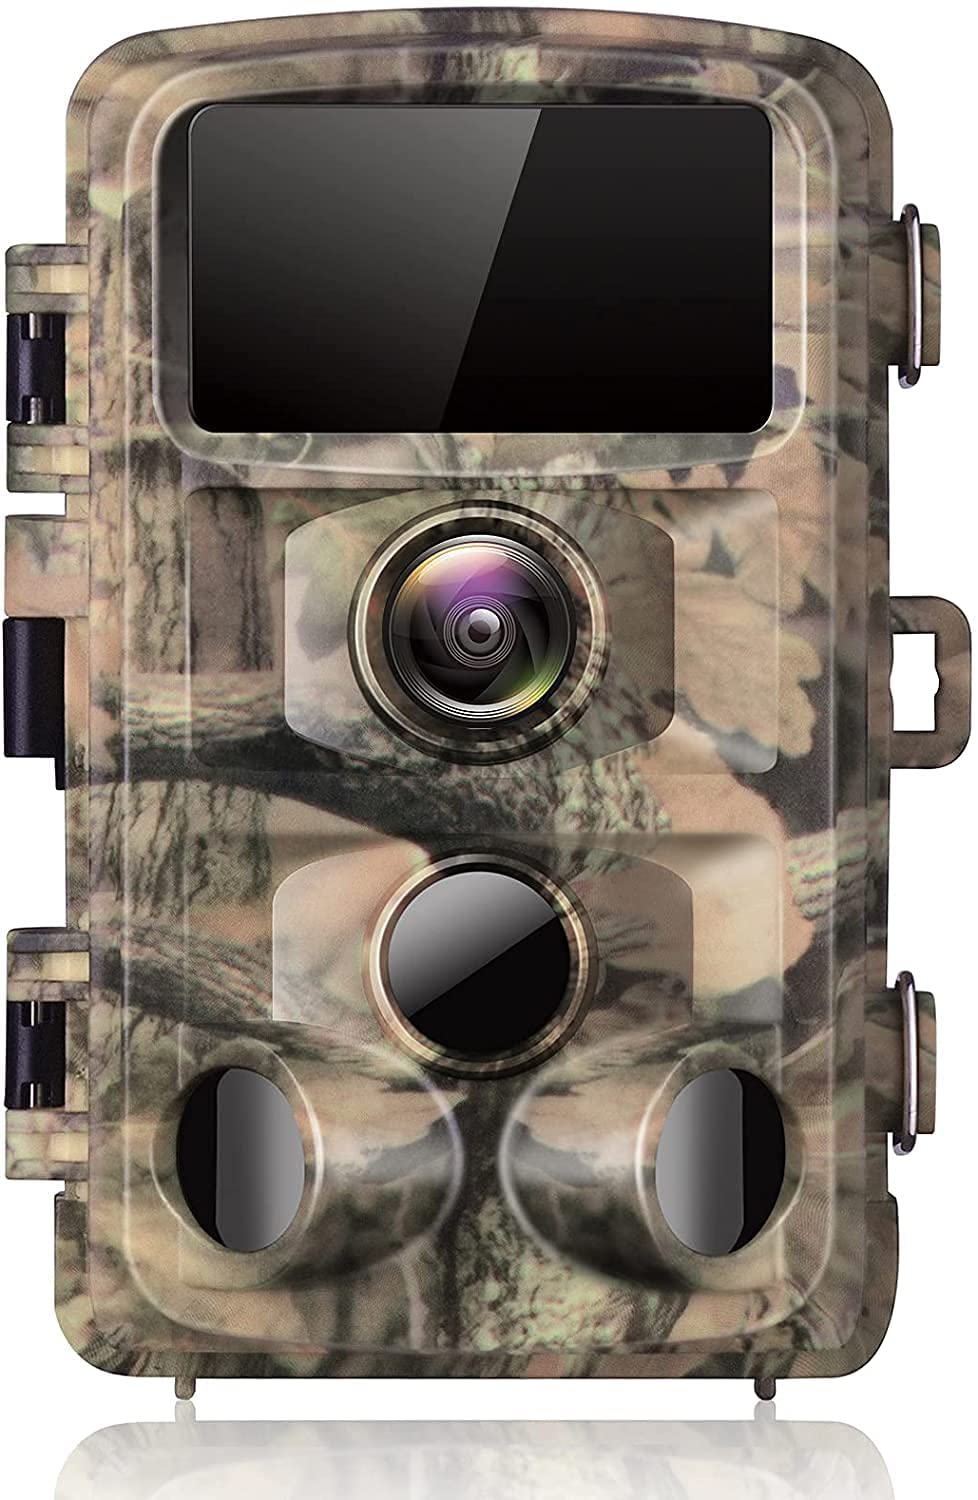 CAMPARK T45 Trail Camera 1080P Waterproof Deer Game Hunting Camera with 3 Infrared Sensors Motion Activated Night Vision 20MP Trail Cam for Wildlife Monitoring